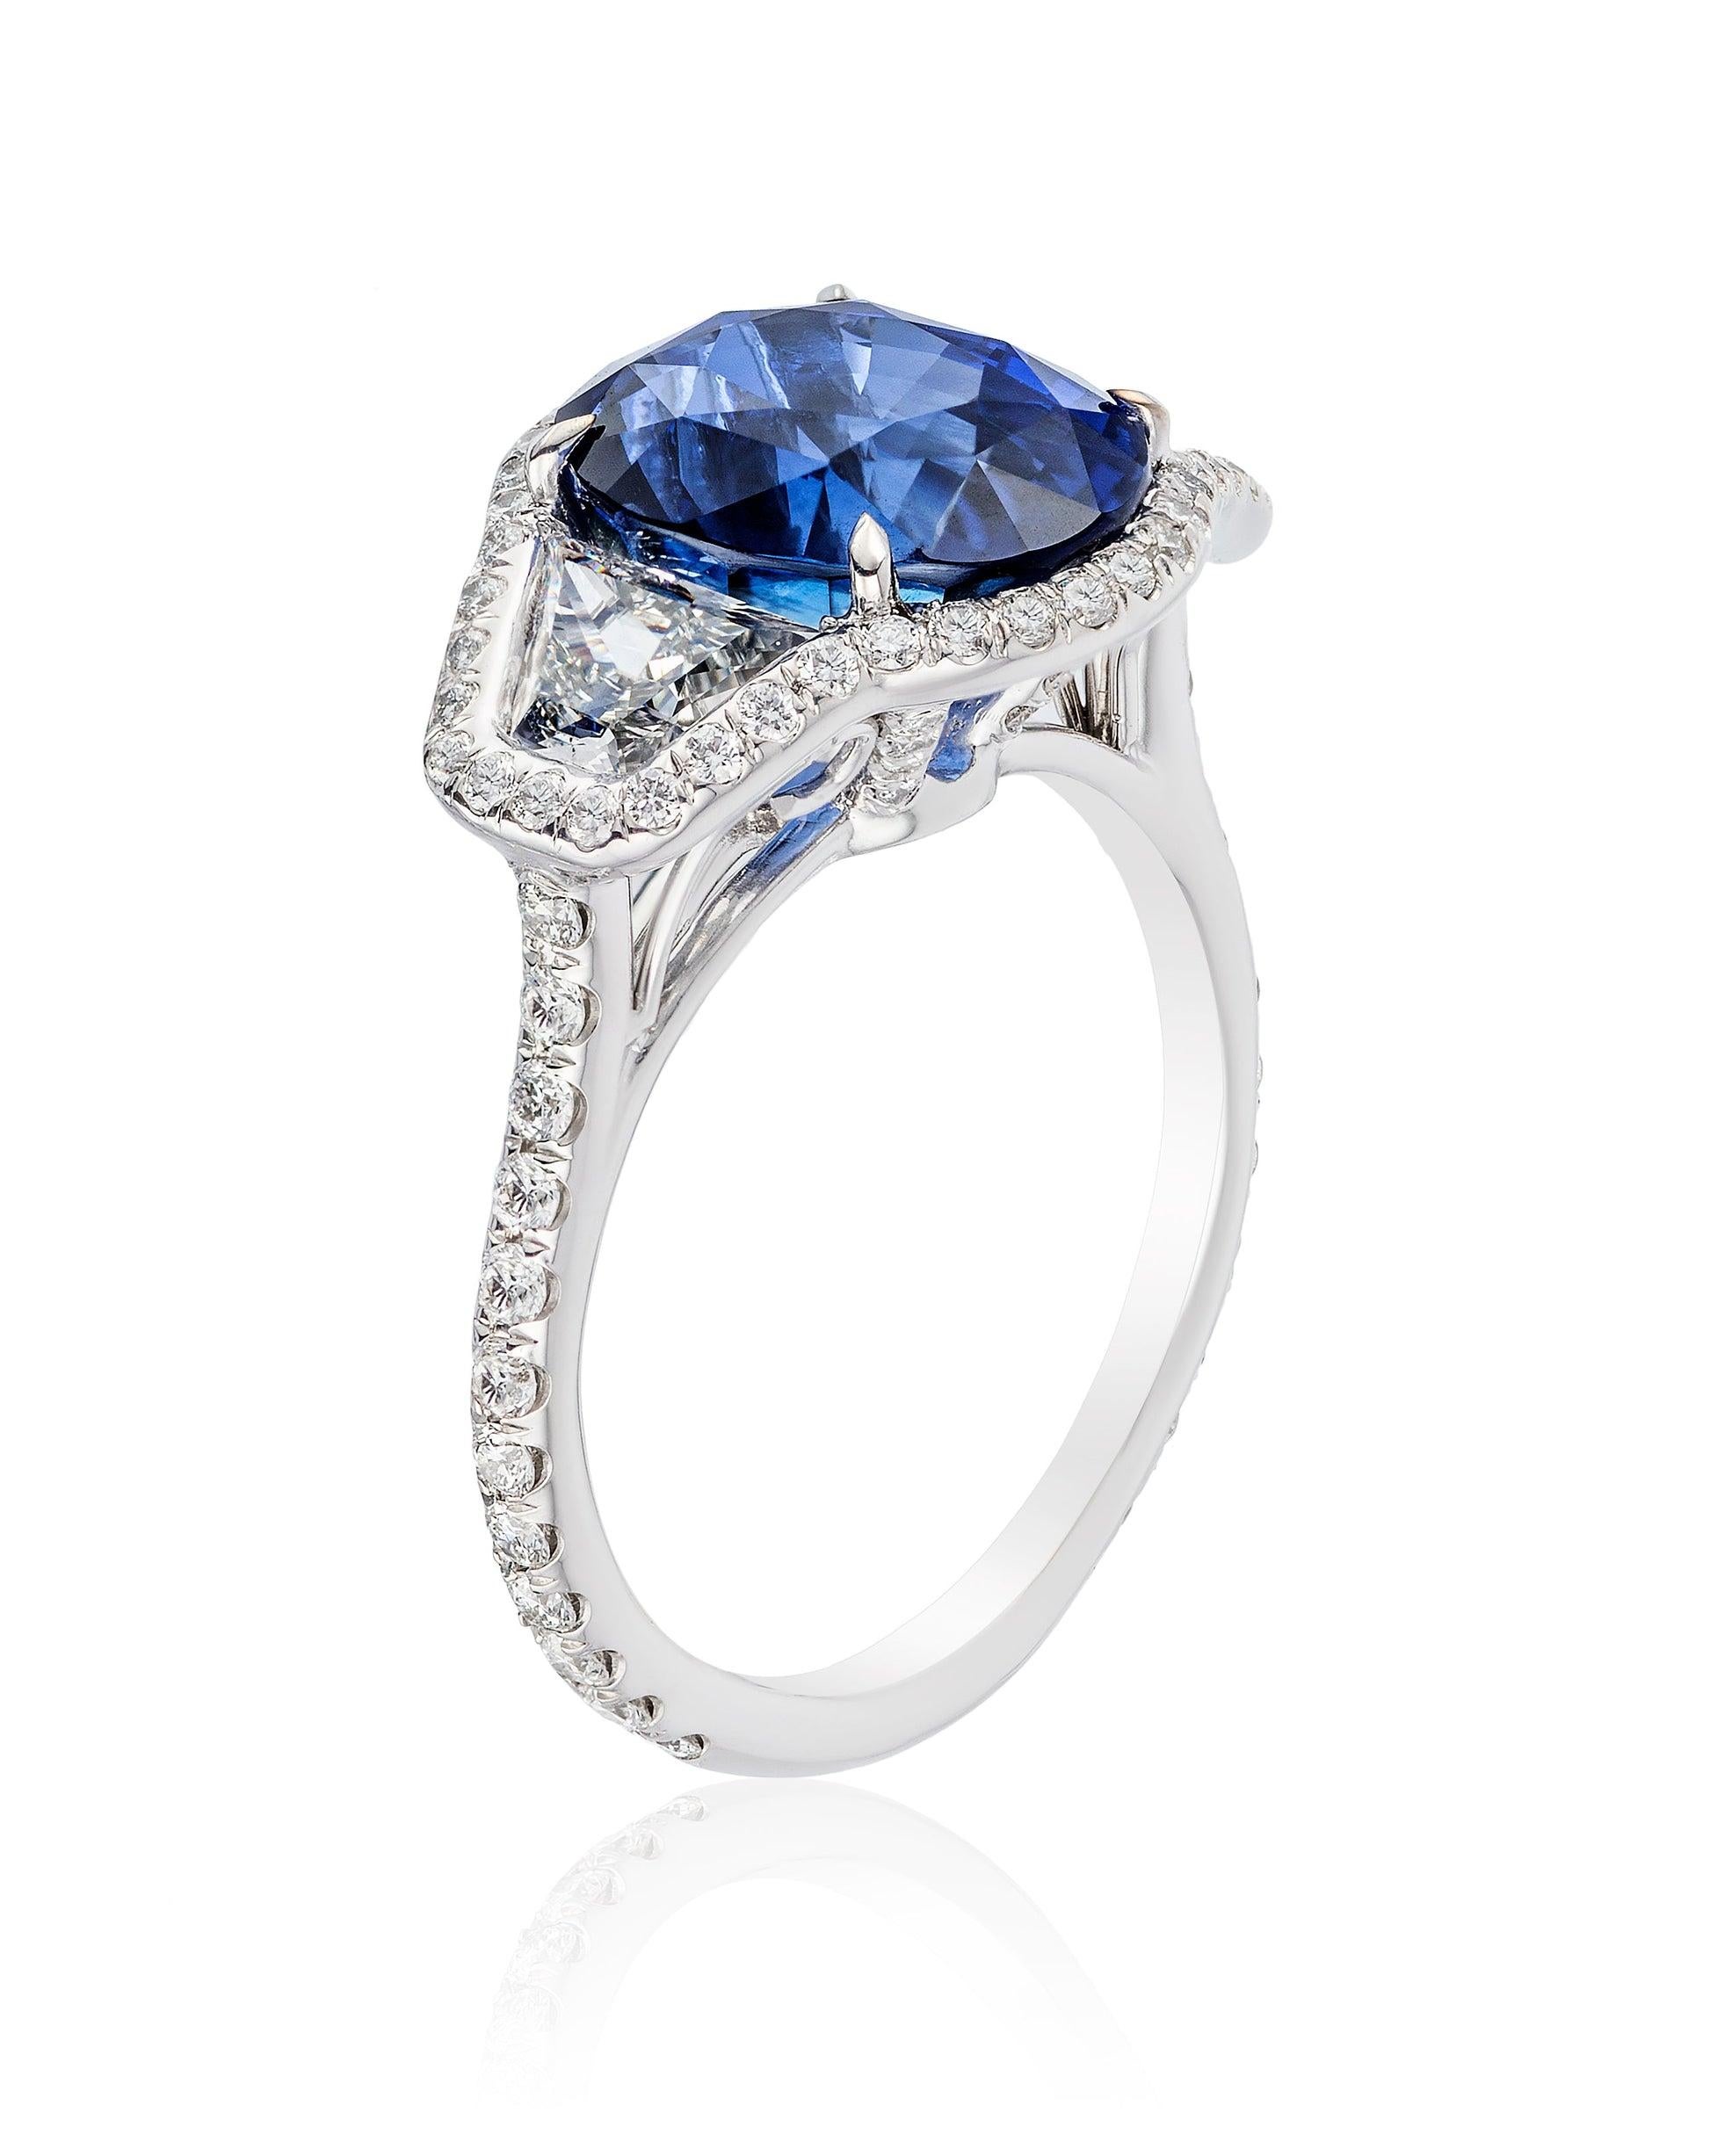 A platinum ring featuring a large Blue Sapphire accompanied by two diamonds (1.12 carats total), beautifully adjoined by a halo and band that together feature 64 sparkling micro-diamonds.
 
Details
Center: Blue Sapphire – 6.22ct
Dimensions : 11.36 x